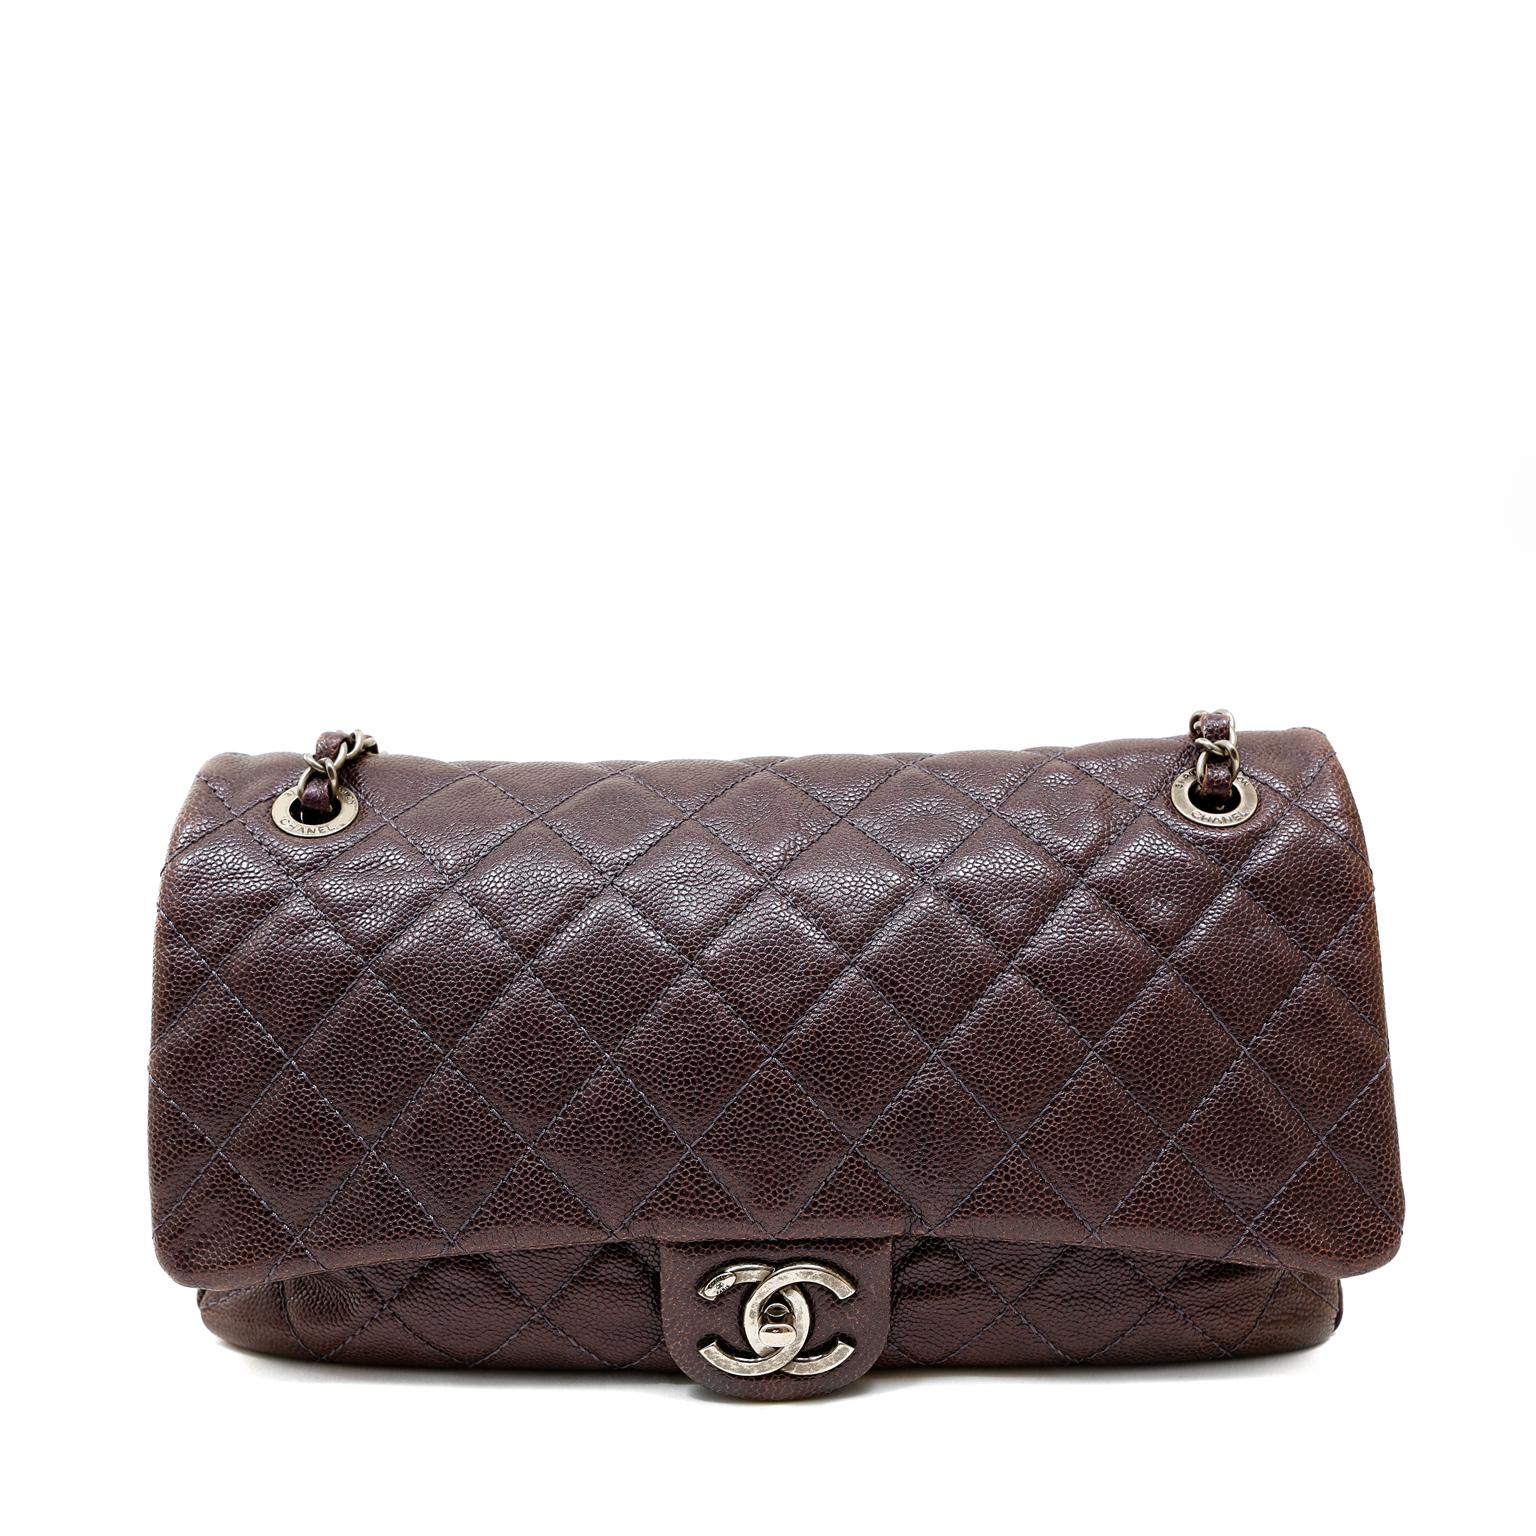 chanel flap bag with zipper